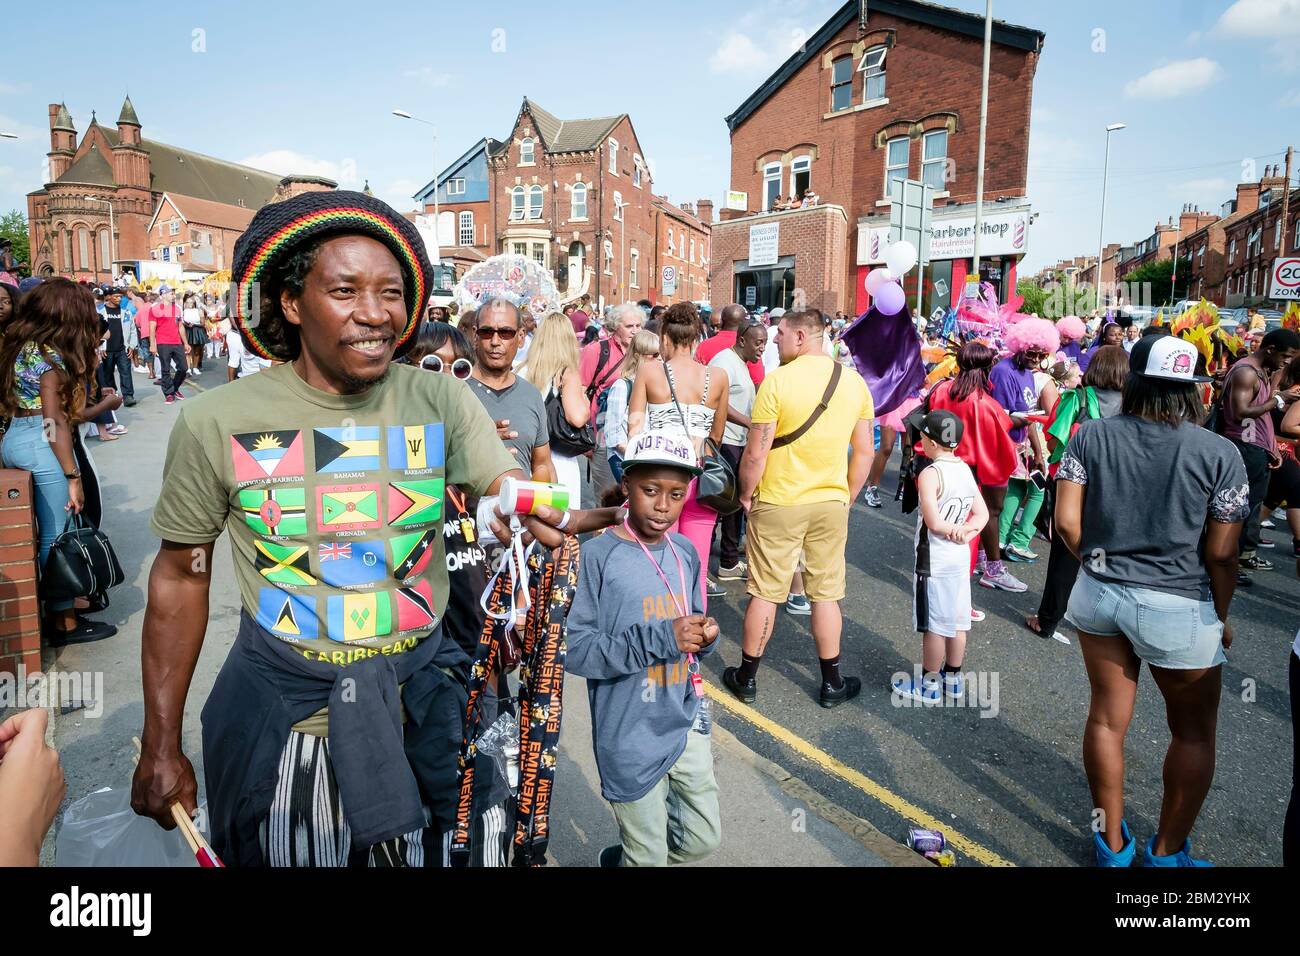 Street scene with man in rasta hat at the Chapeltown - Leeds West Indian Carnival Stock Photo